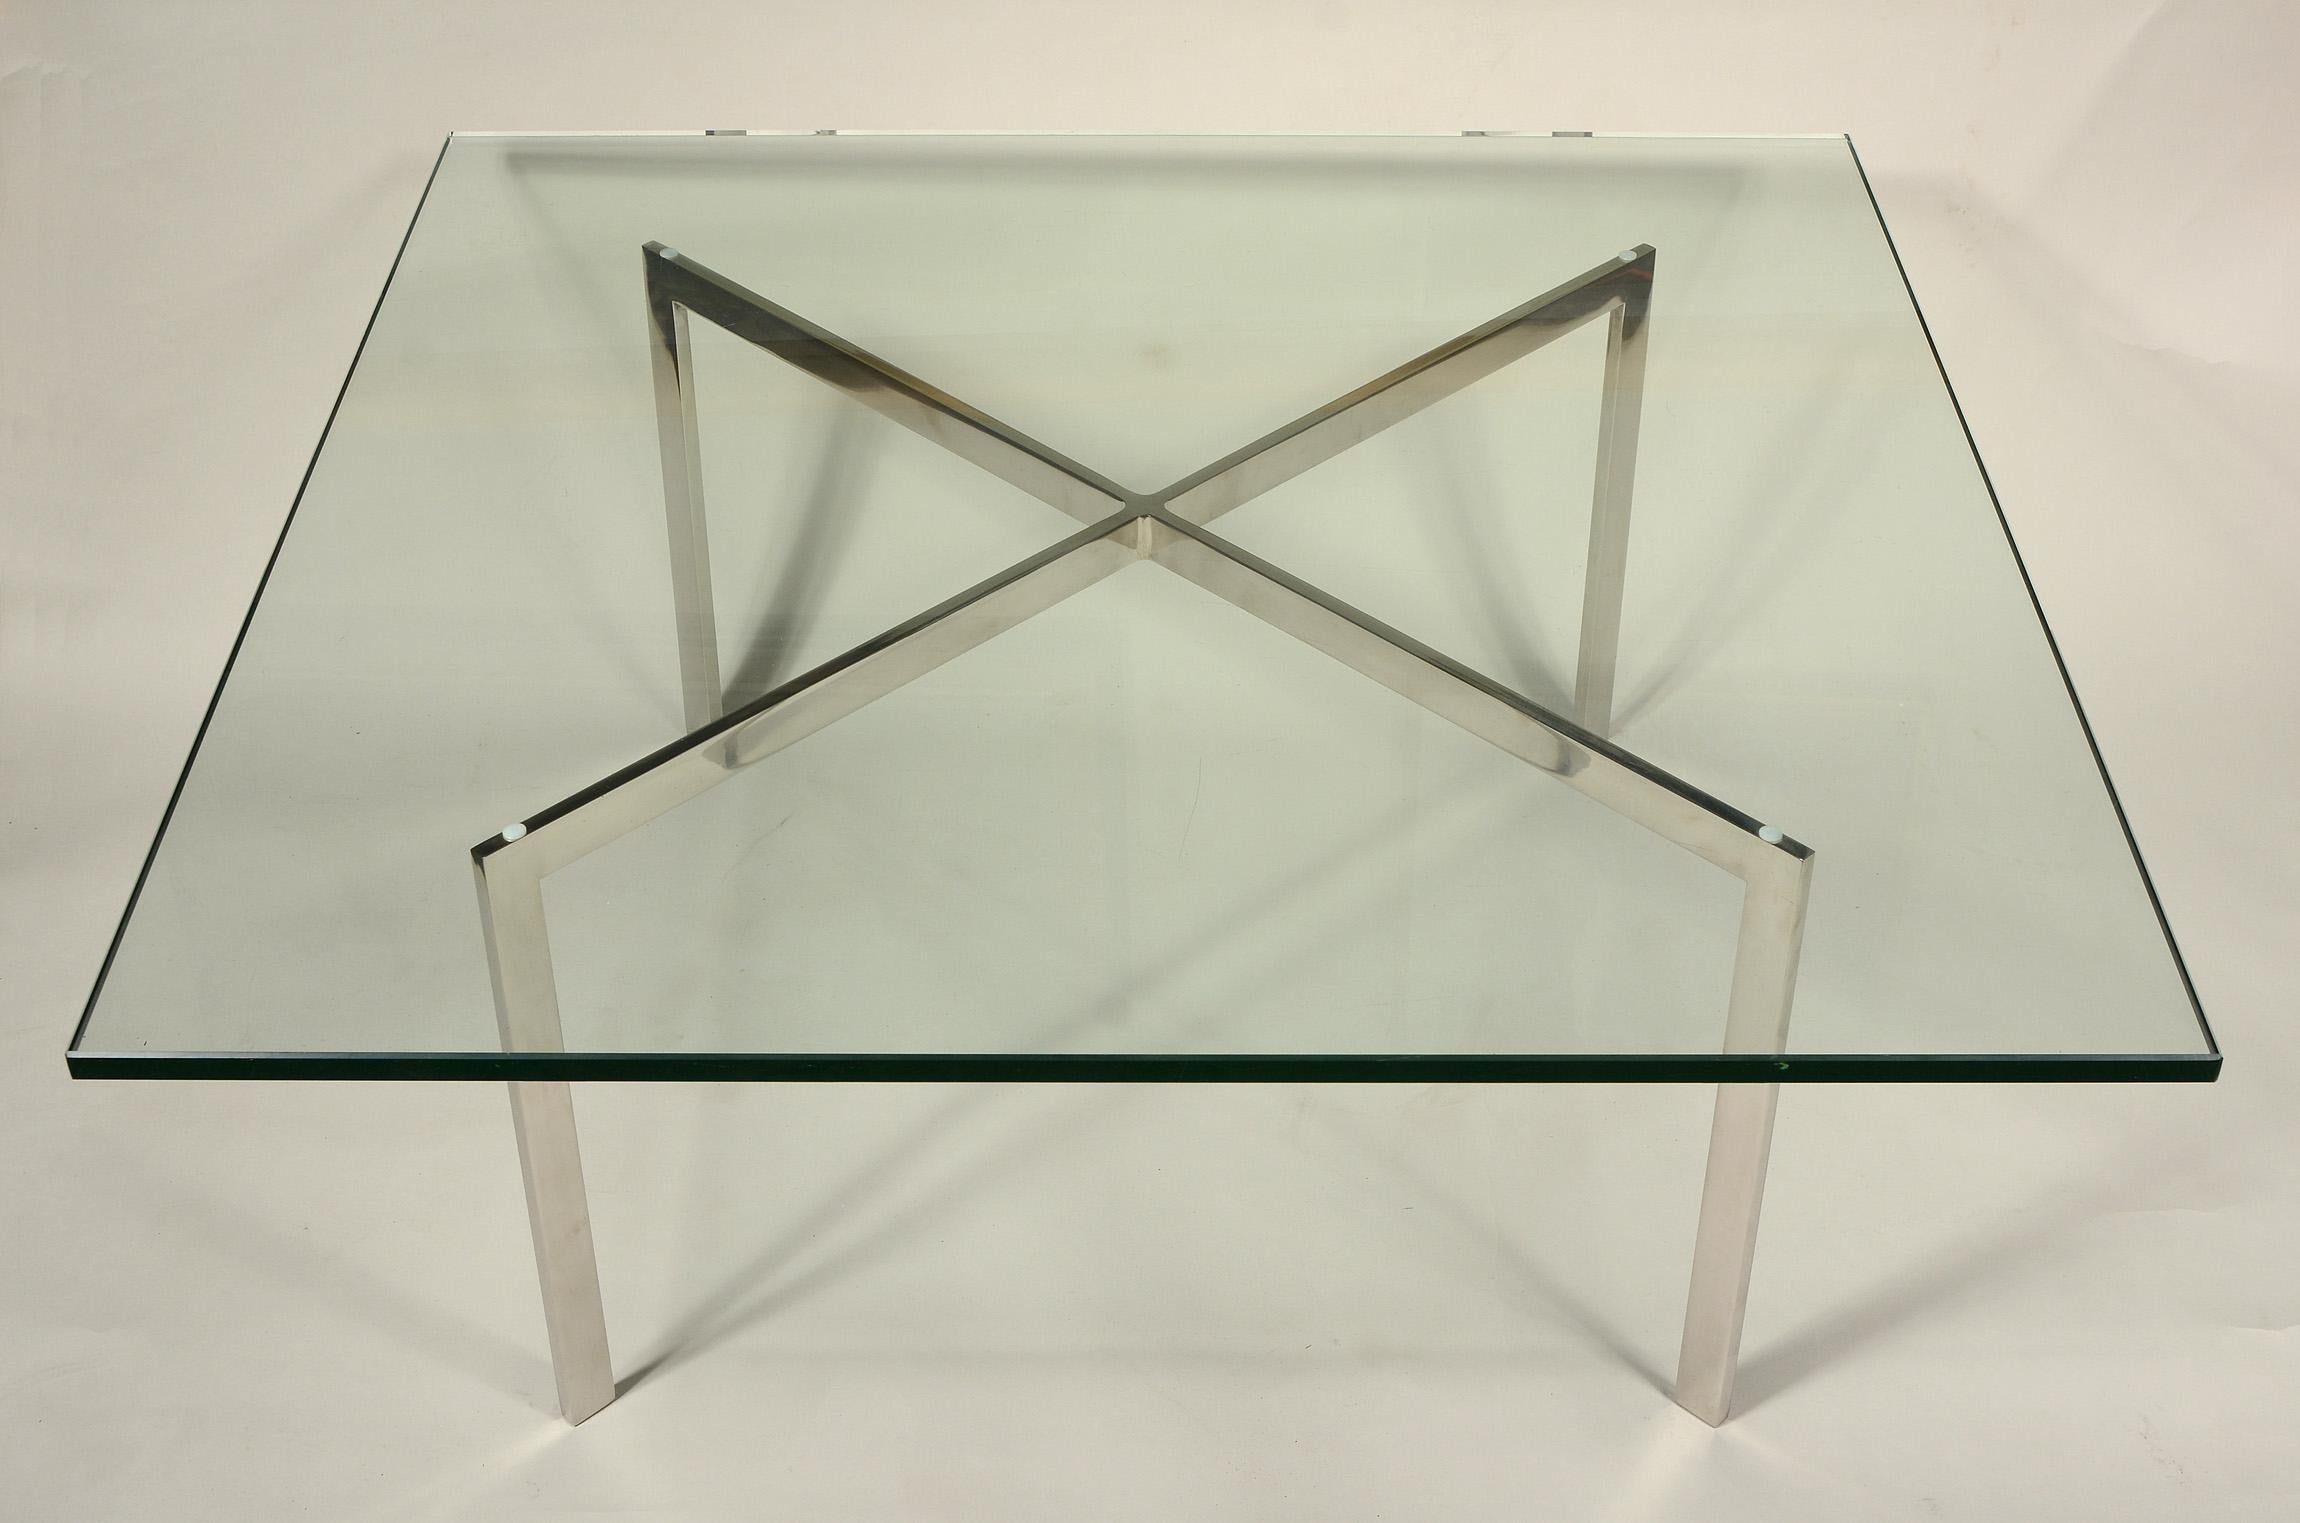 Older Barcelona table designed by Ludwig Mies Van Der Roe in 1929. This table was produces by Knoll and has a polished stainless steel frame. The frame is signed. The frame shows normal wear with a few small scuffs and scratches. The glass has some